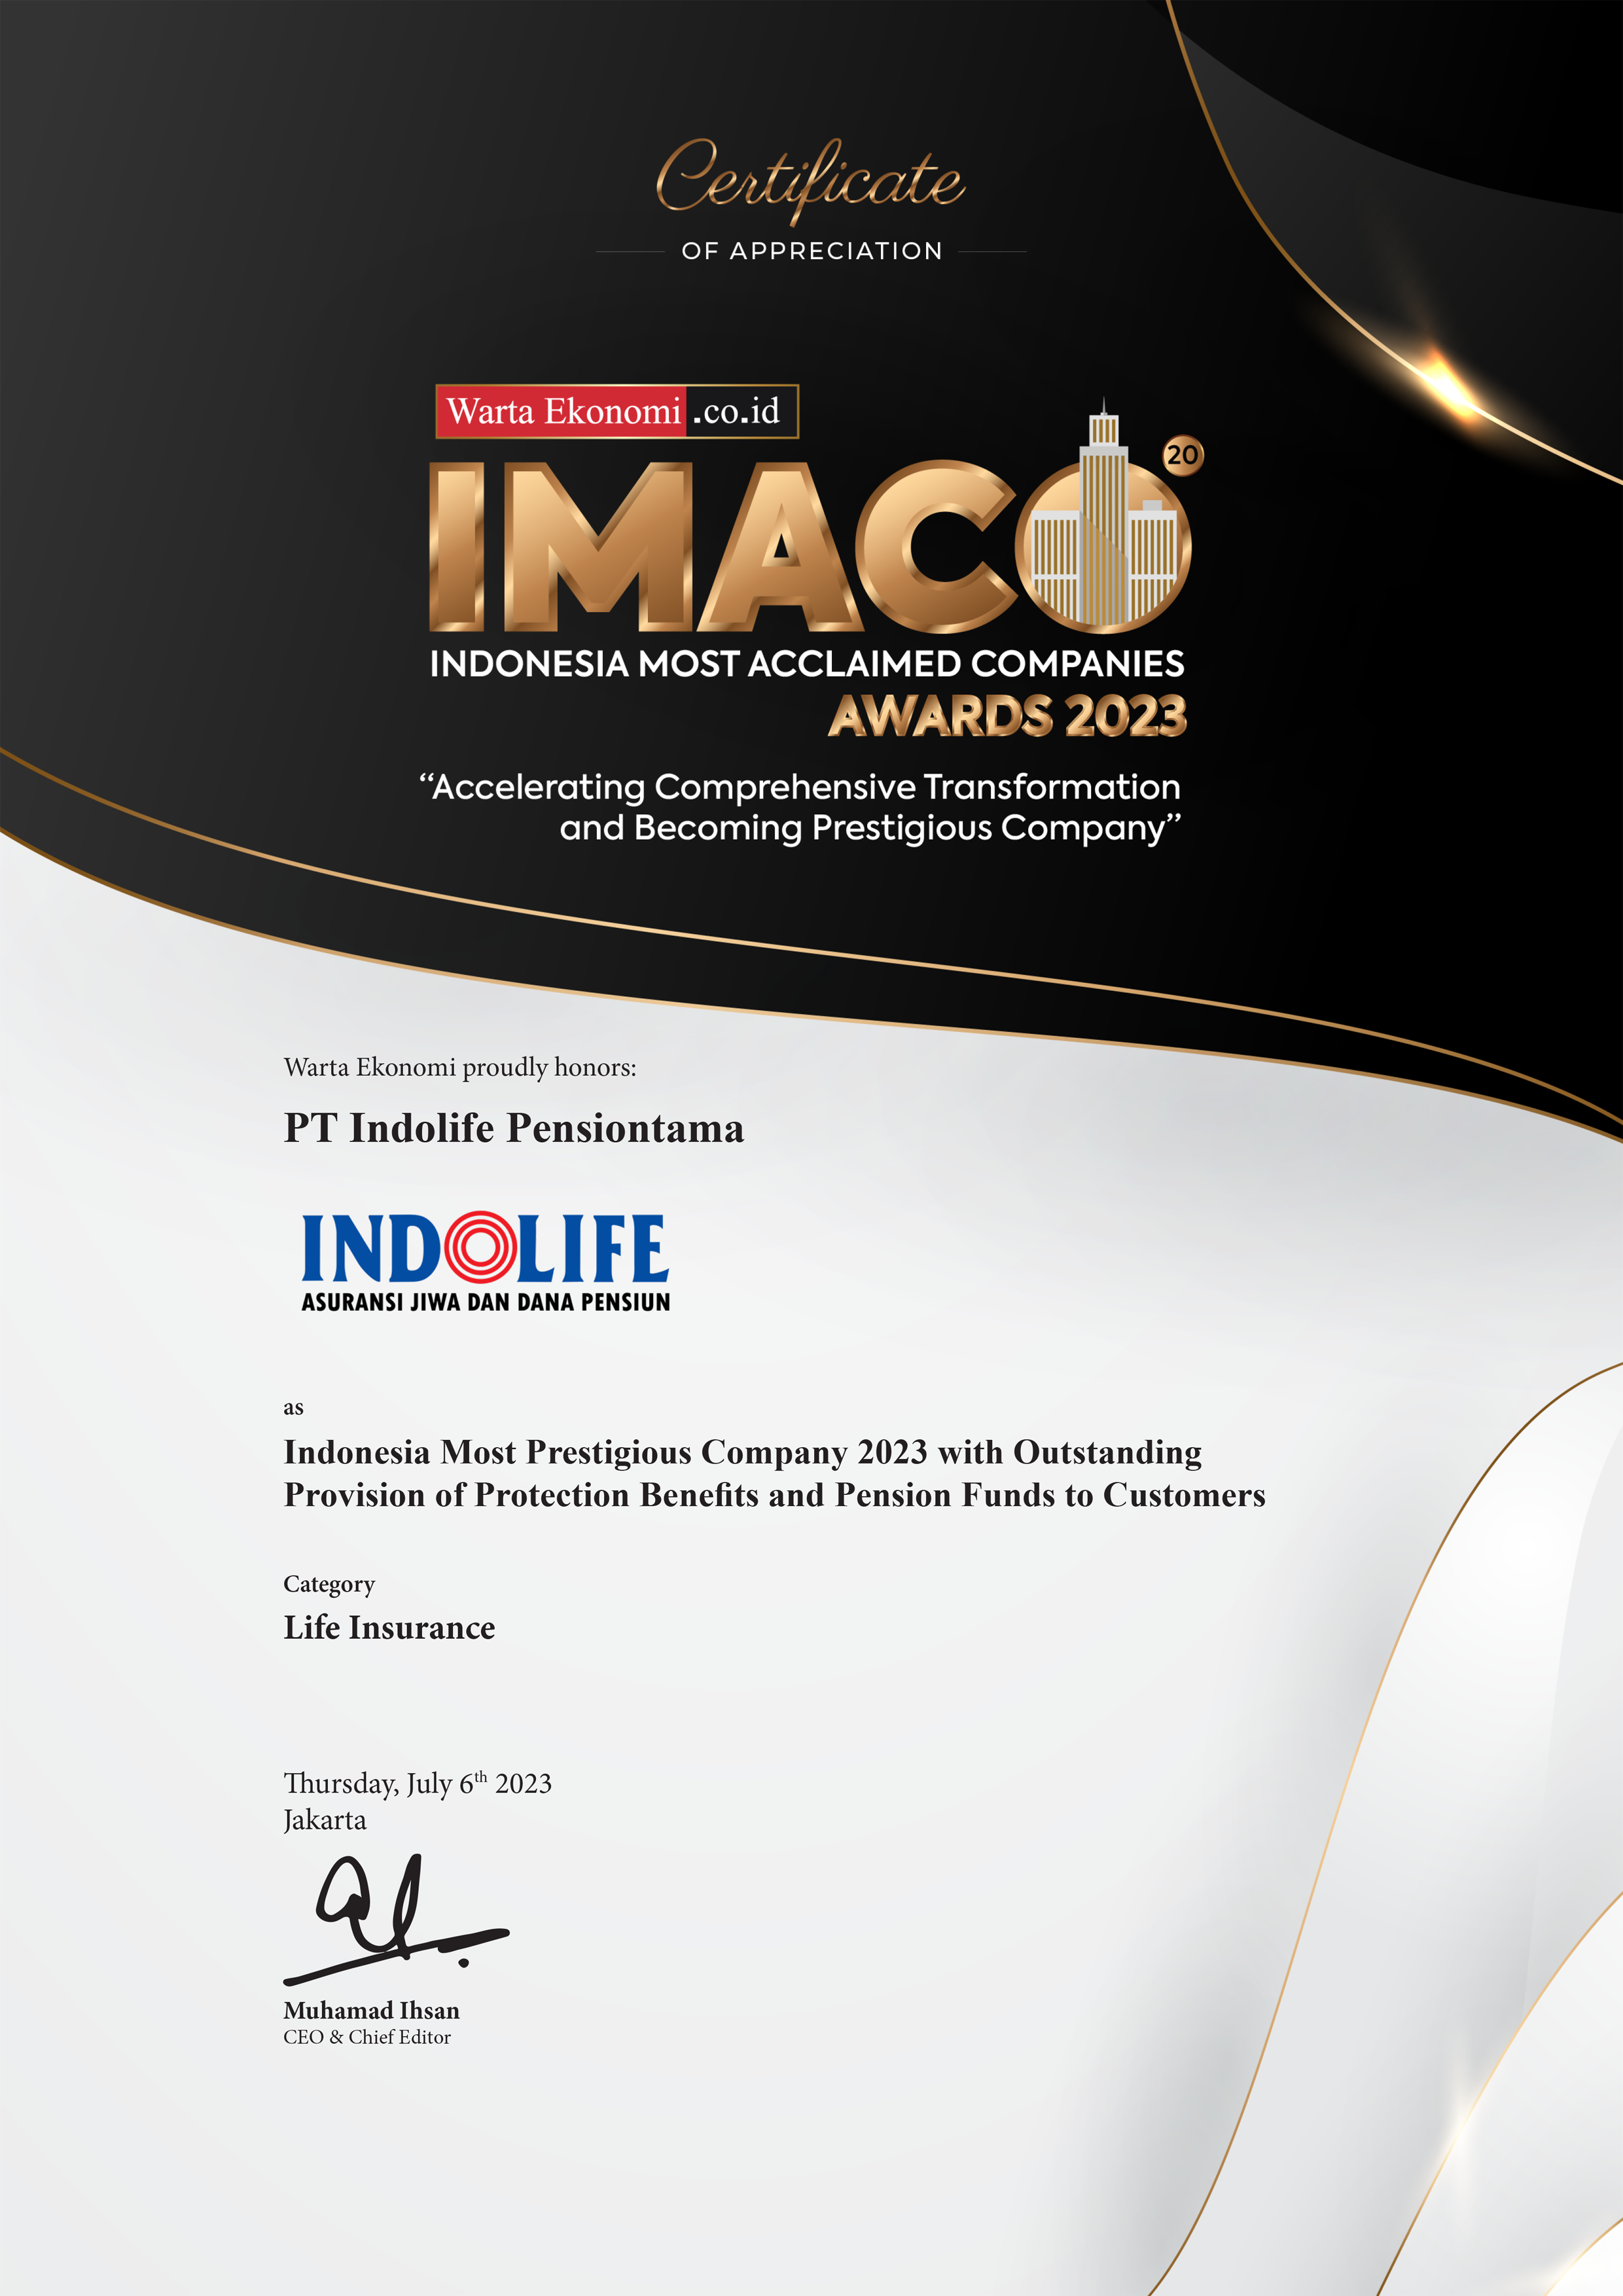 Indonesia Most Acclaimed Companies Awards 2023